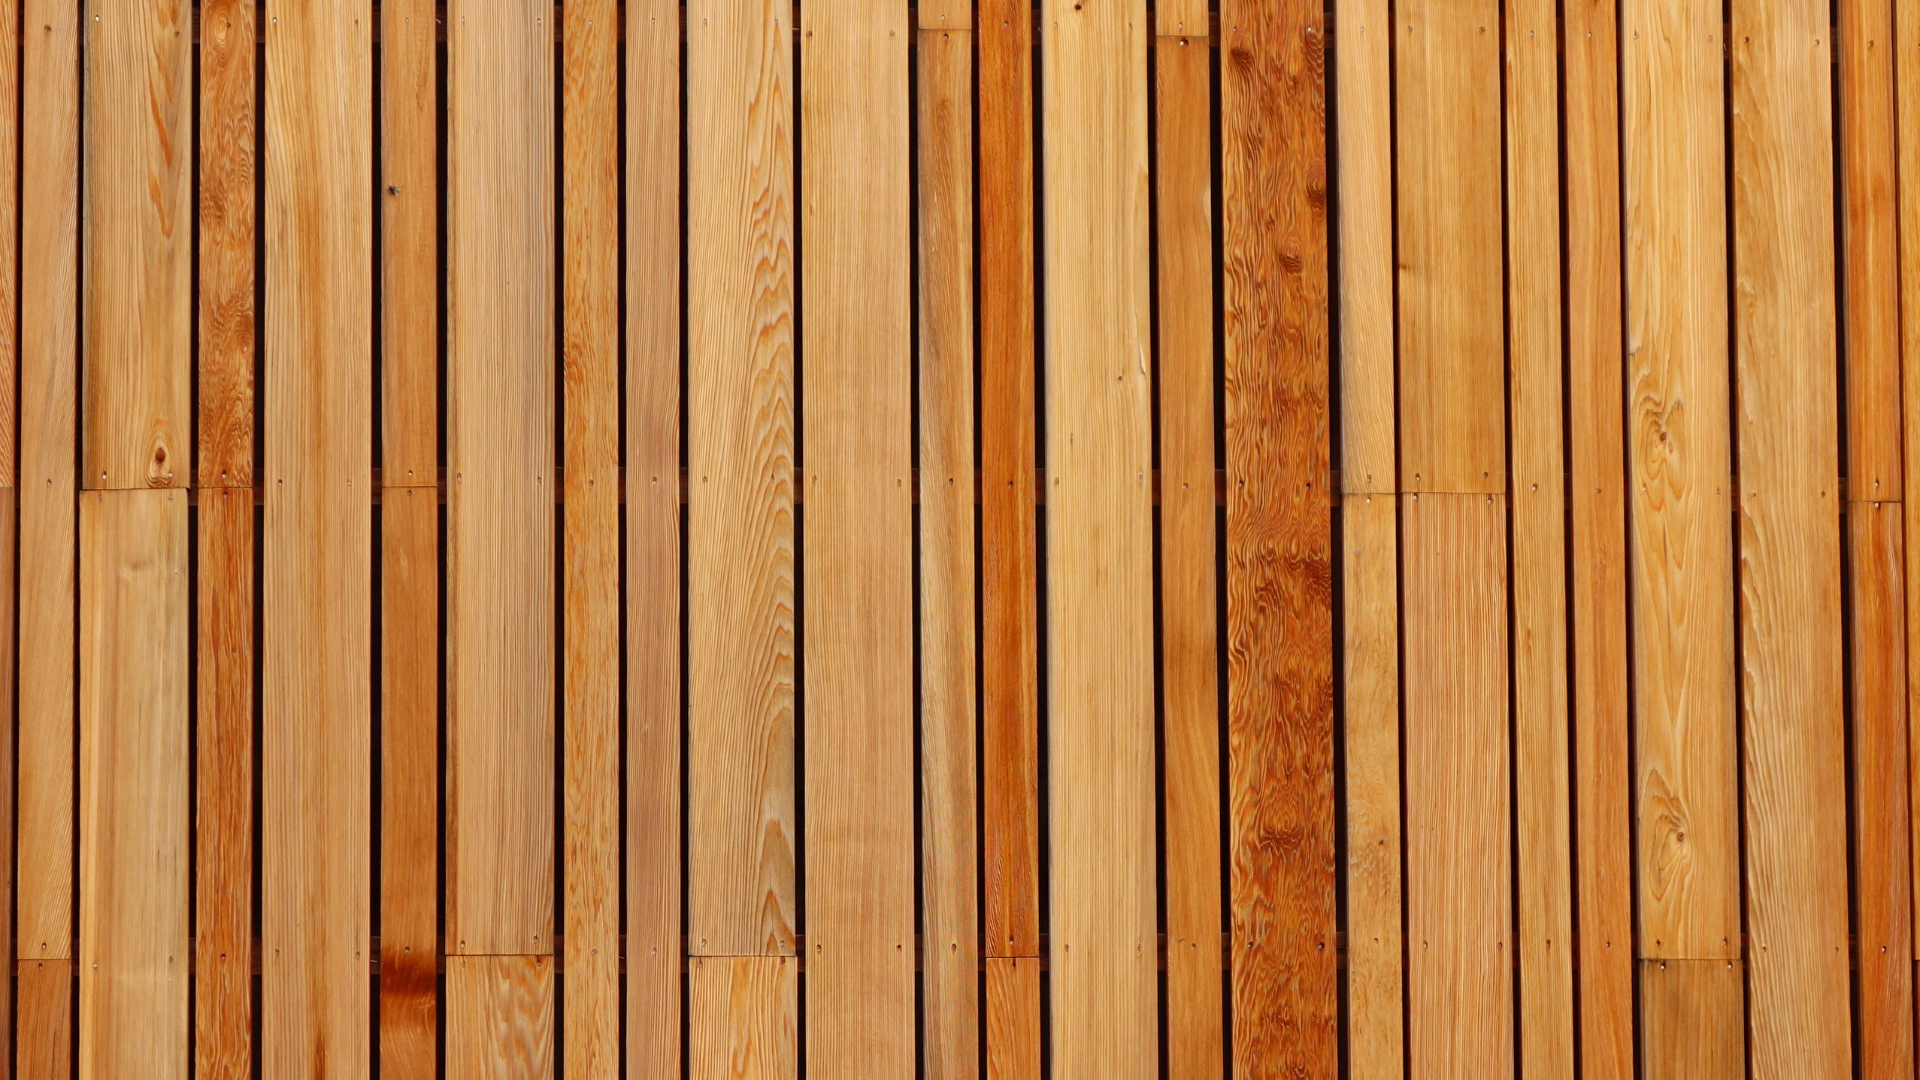 Wooden cladding boards in different colours laid out side-by-side